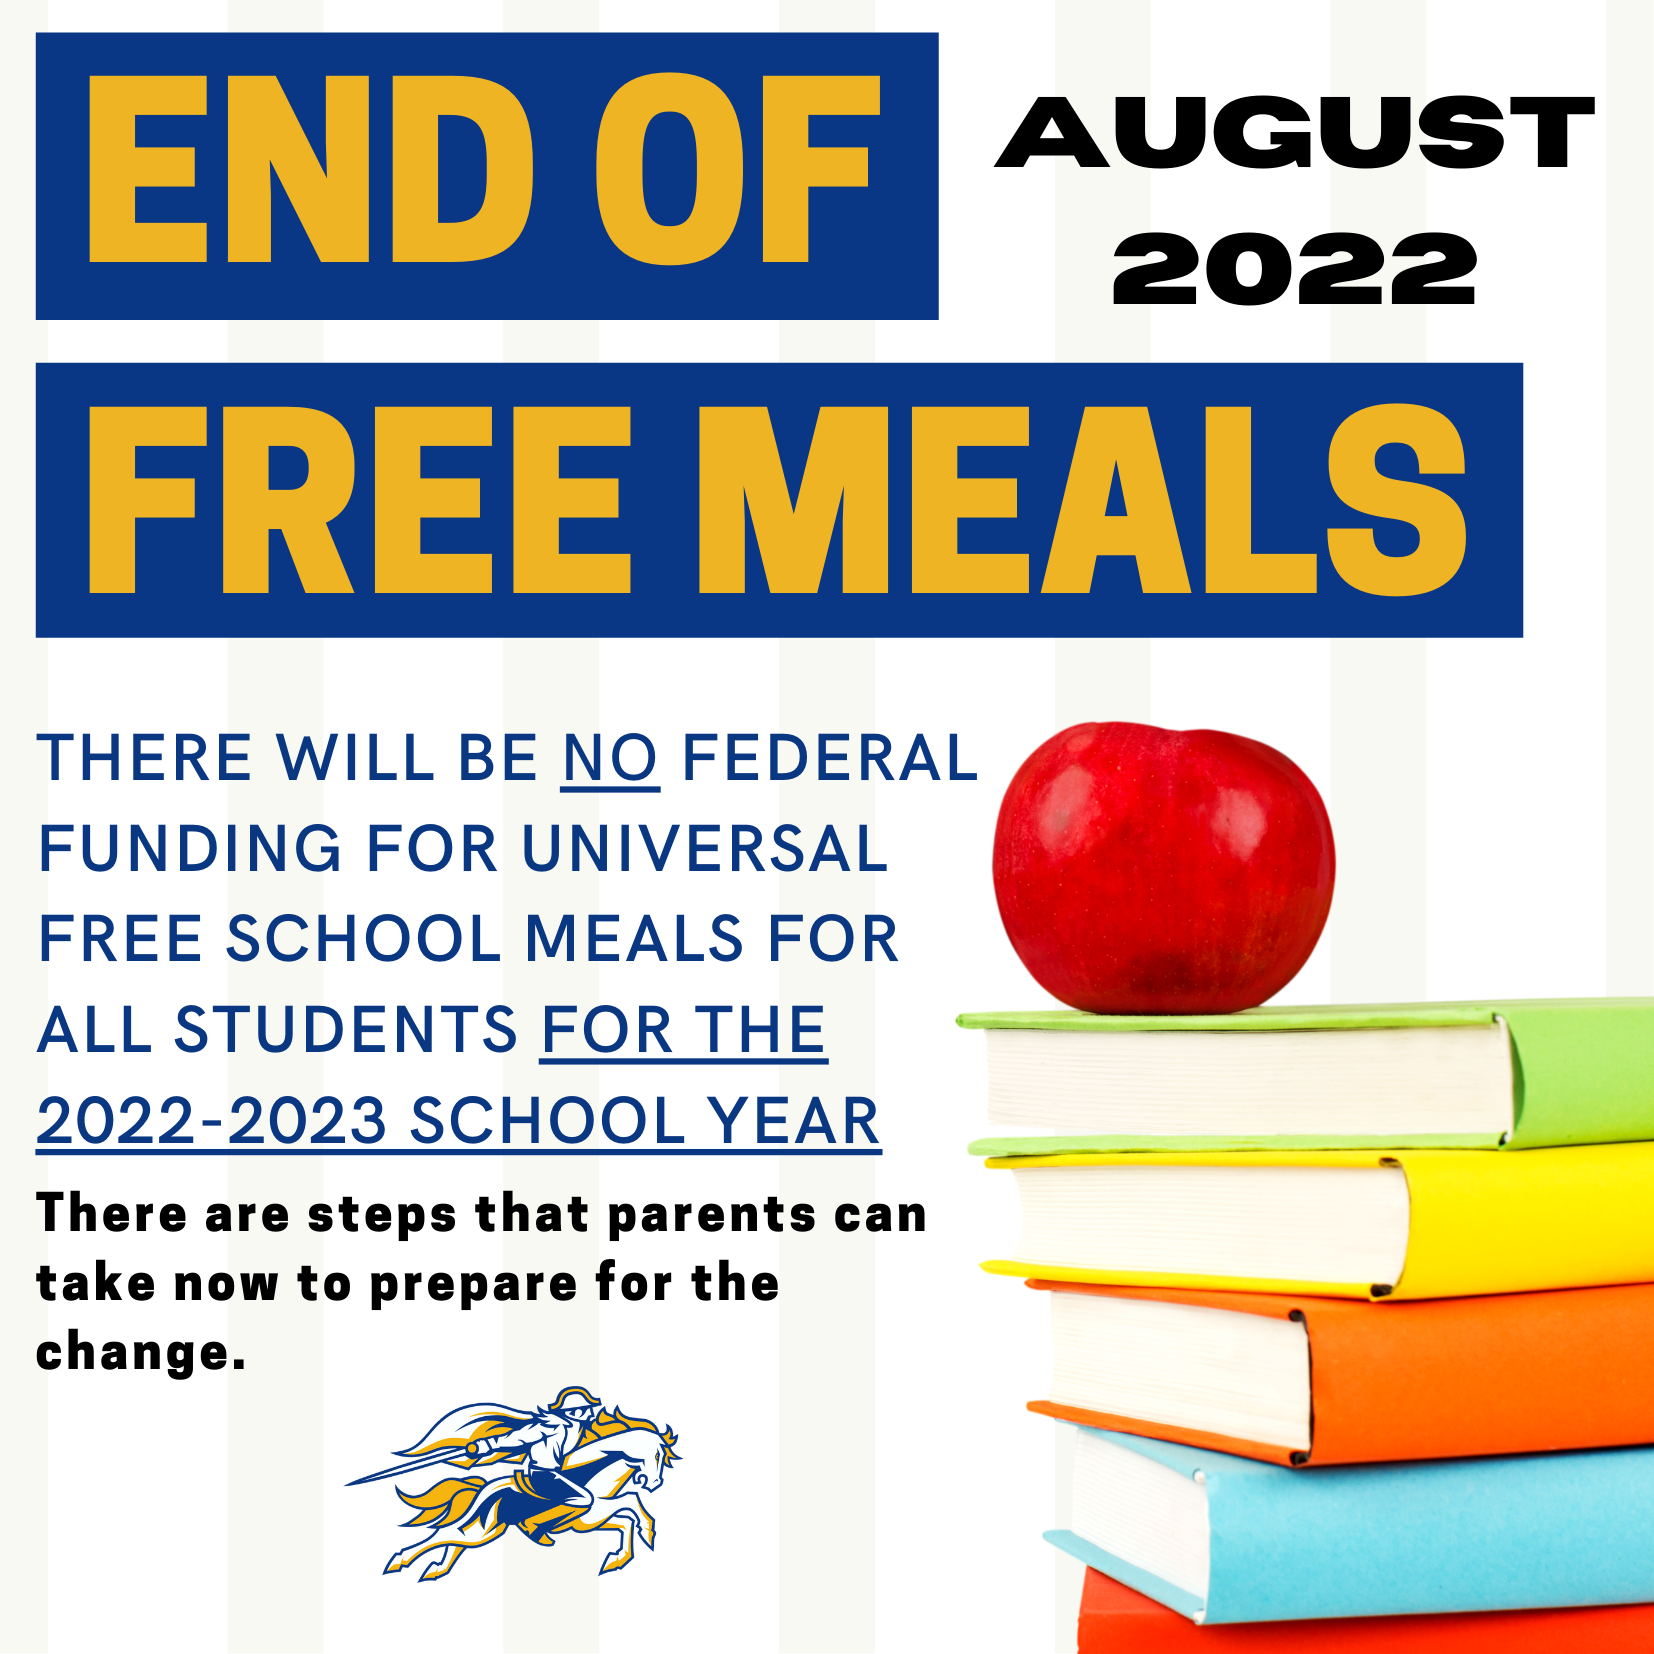 free and reduced lunches